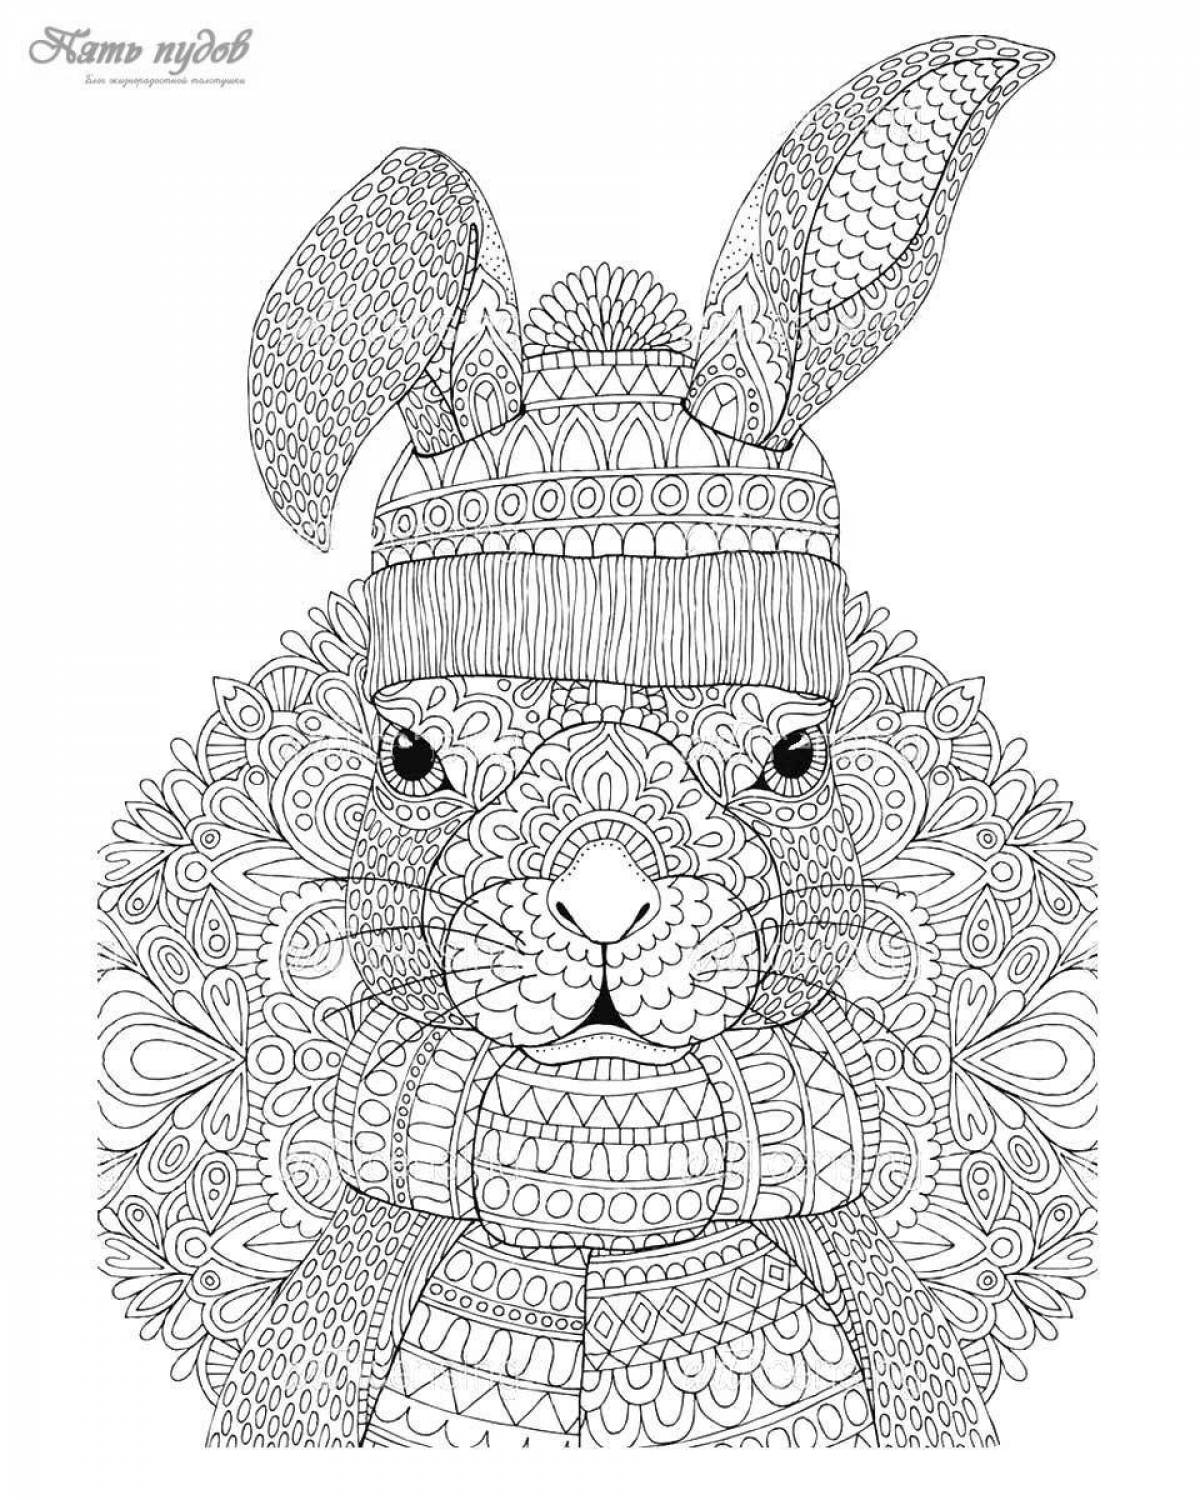 Colorful anti-stress coloring hare